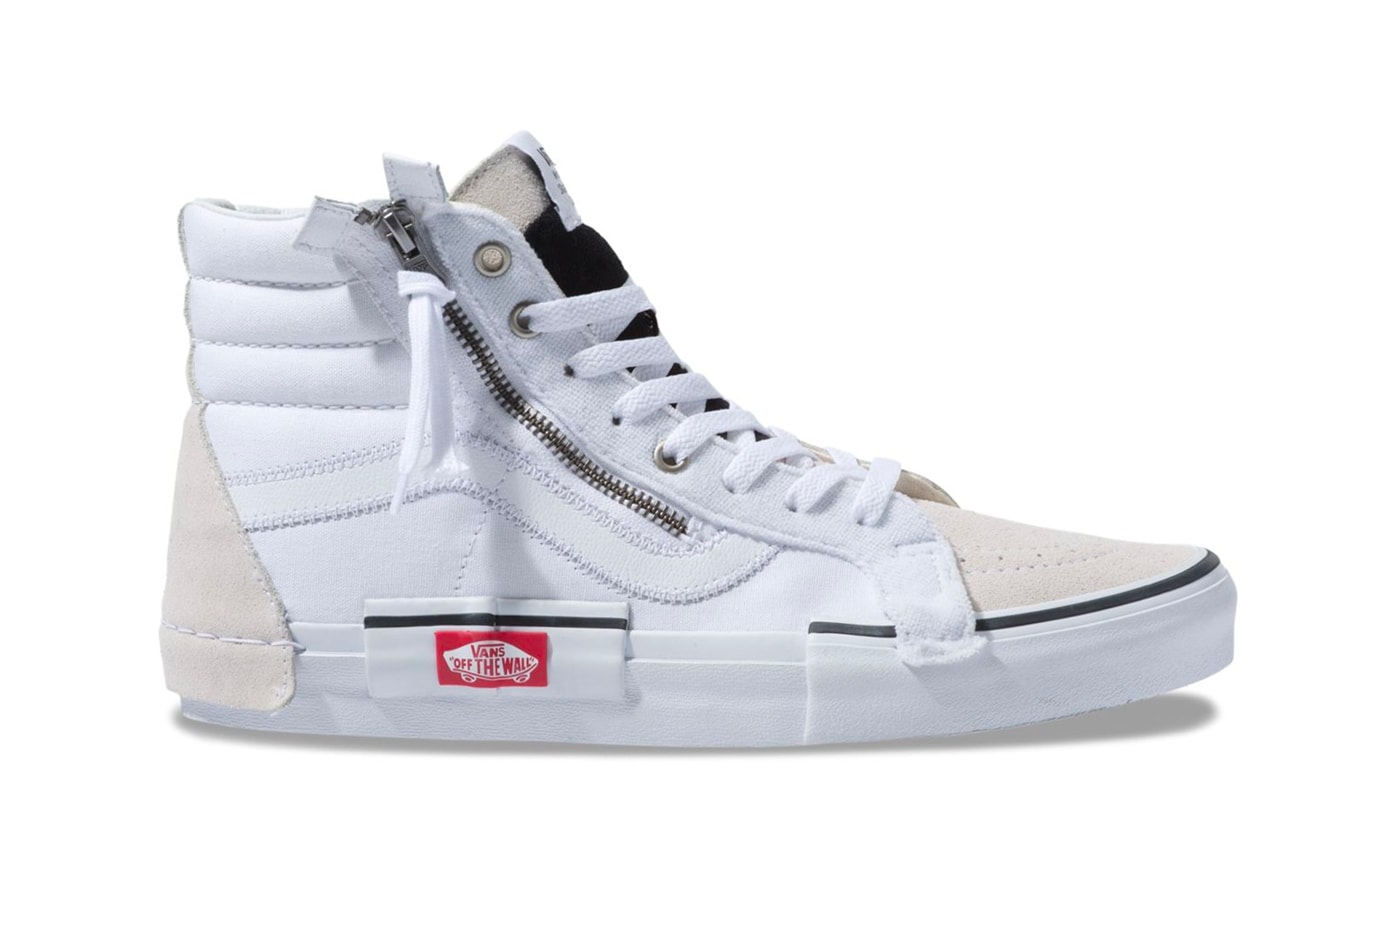 Vans Sk8 Hi Deconstructed White Release Info Date Reissue checkerboard black cap Inside Out